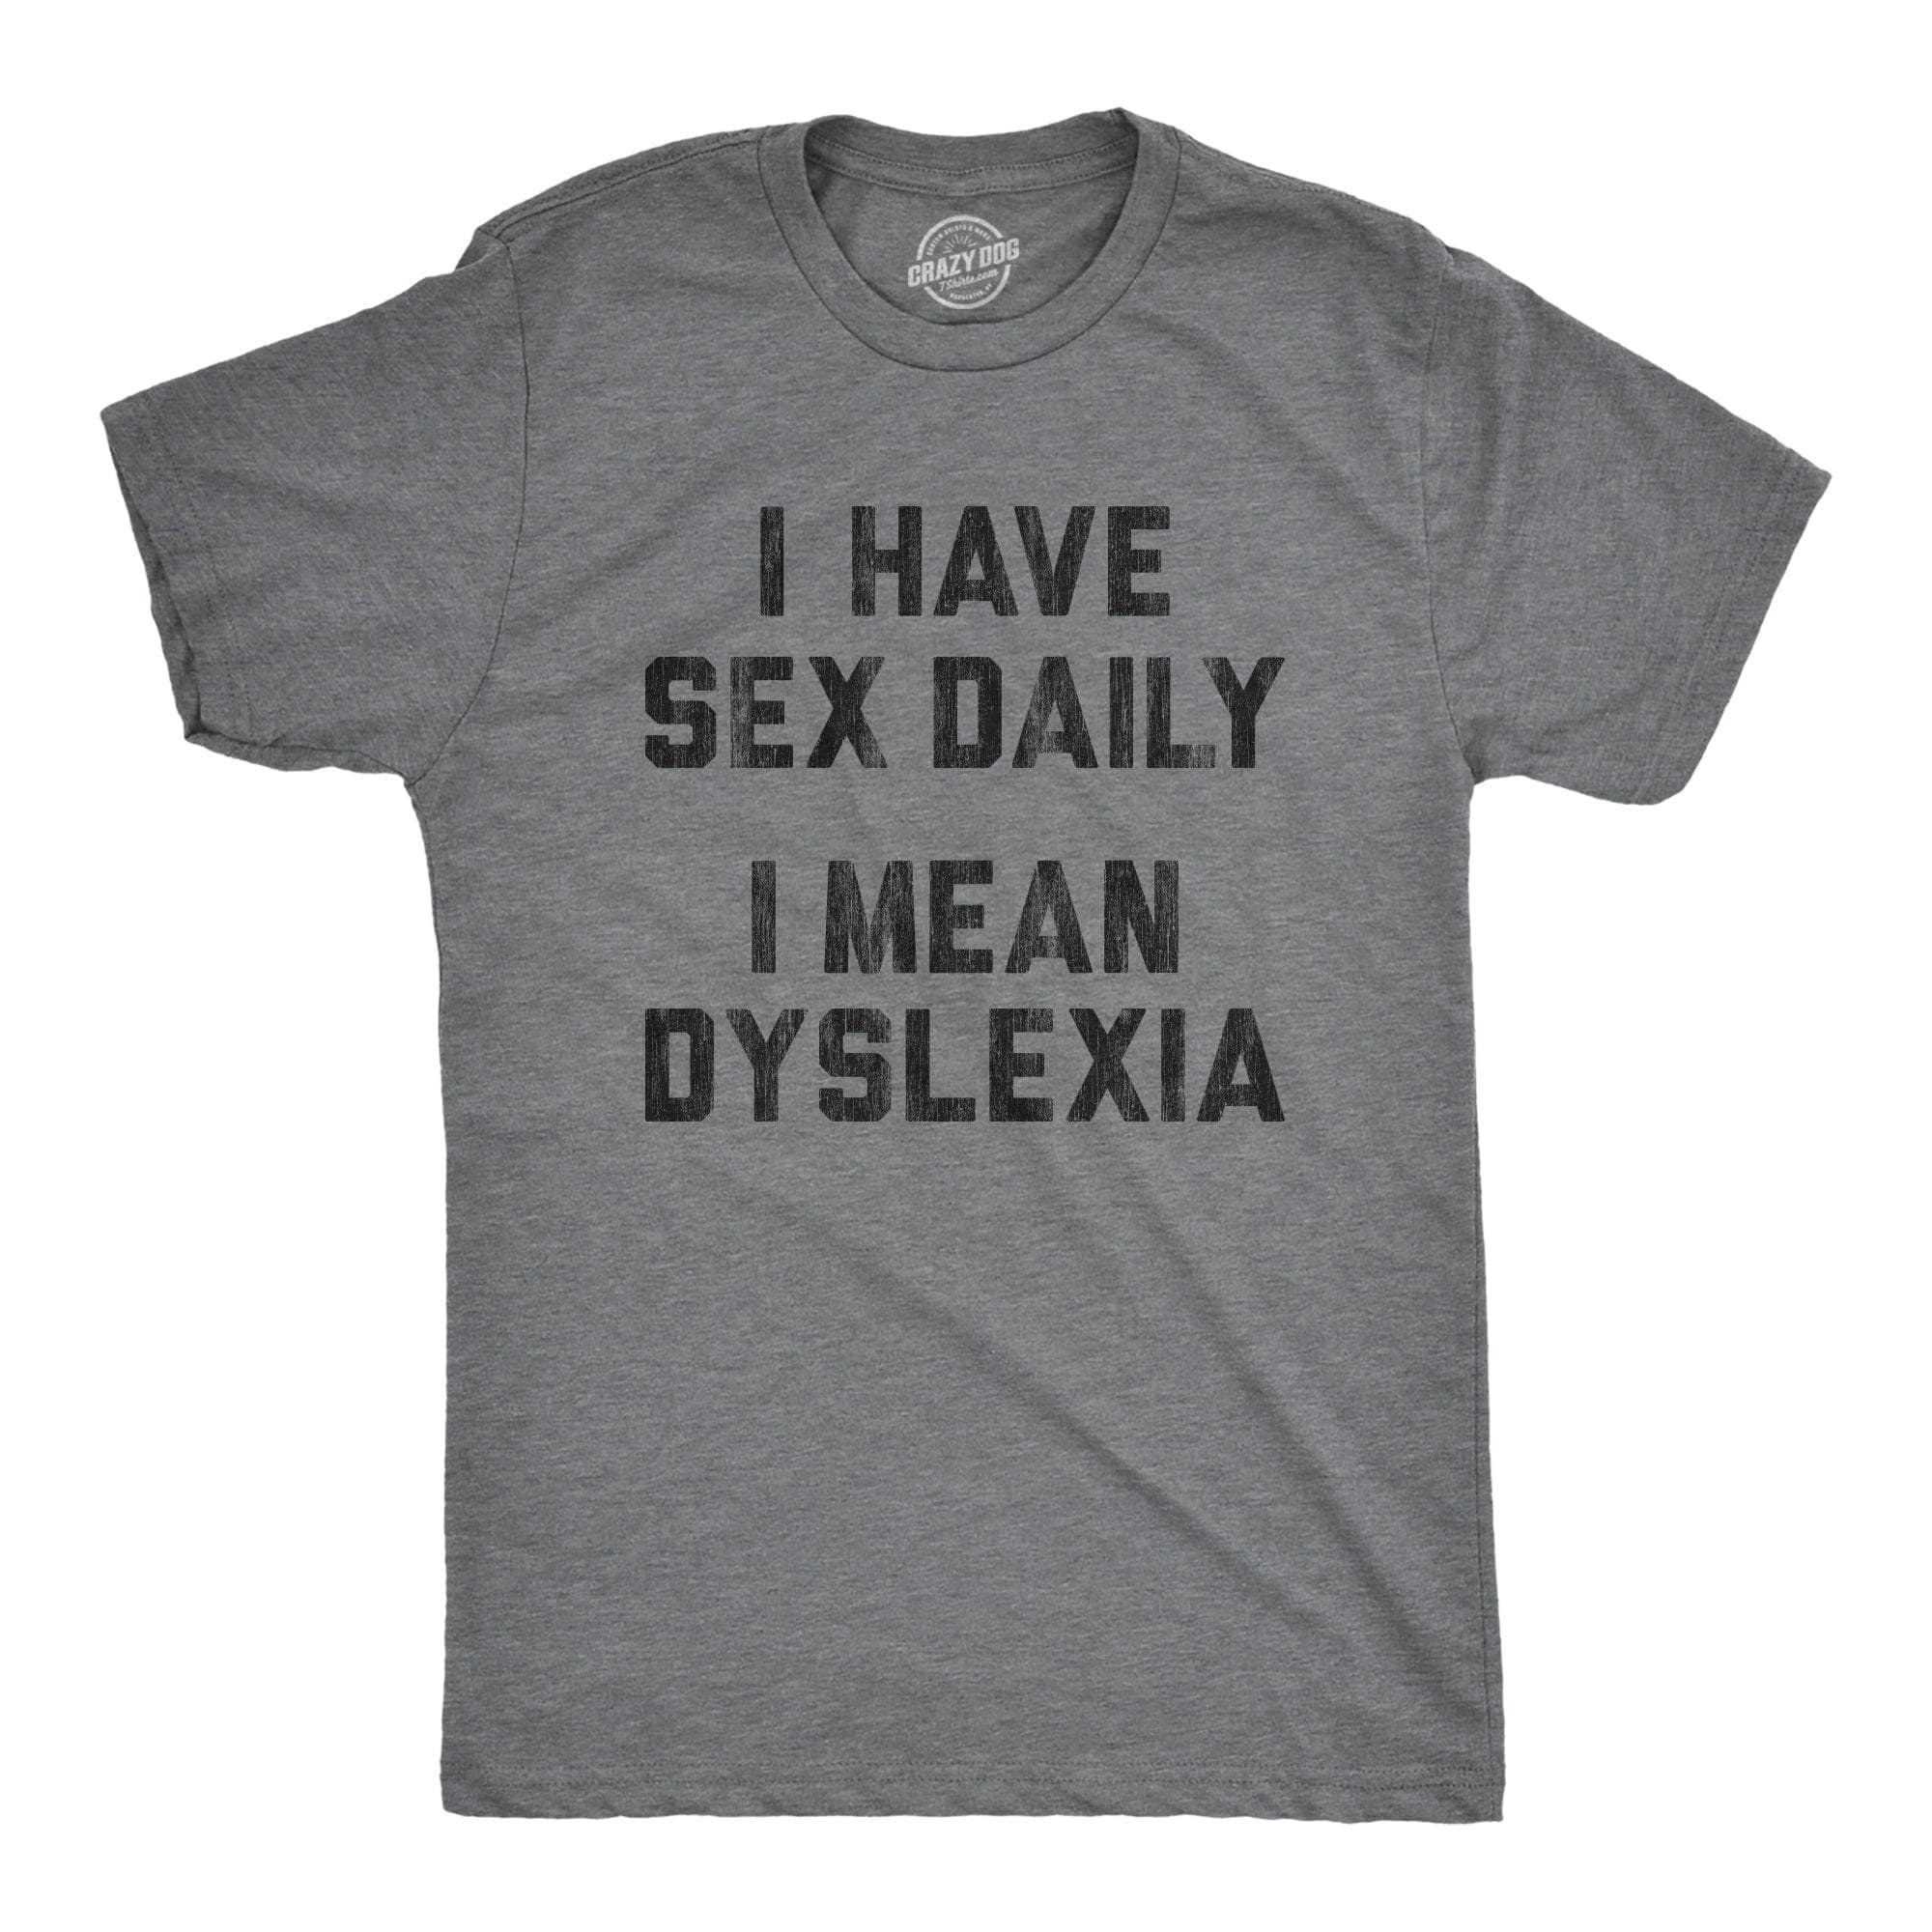 I Have Sex Daily I Mean Dyslexia Men's Tshirt  -  Crazy Dog T-Shirts